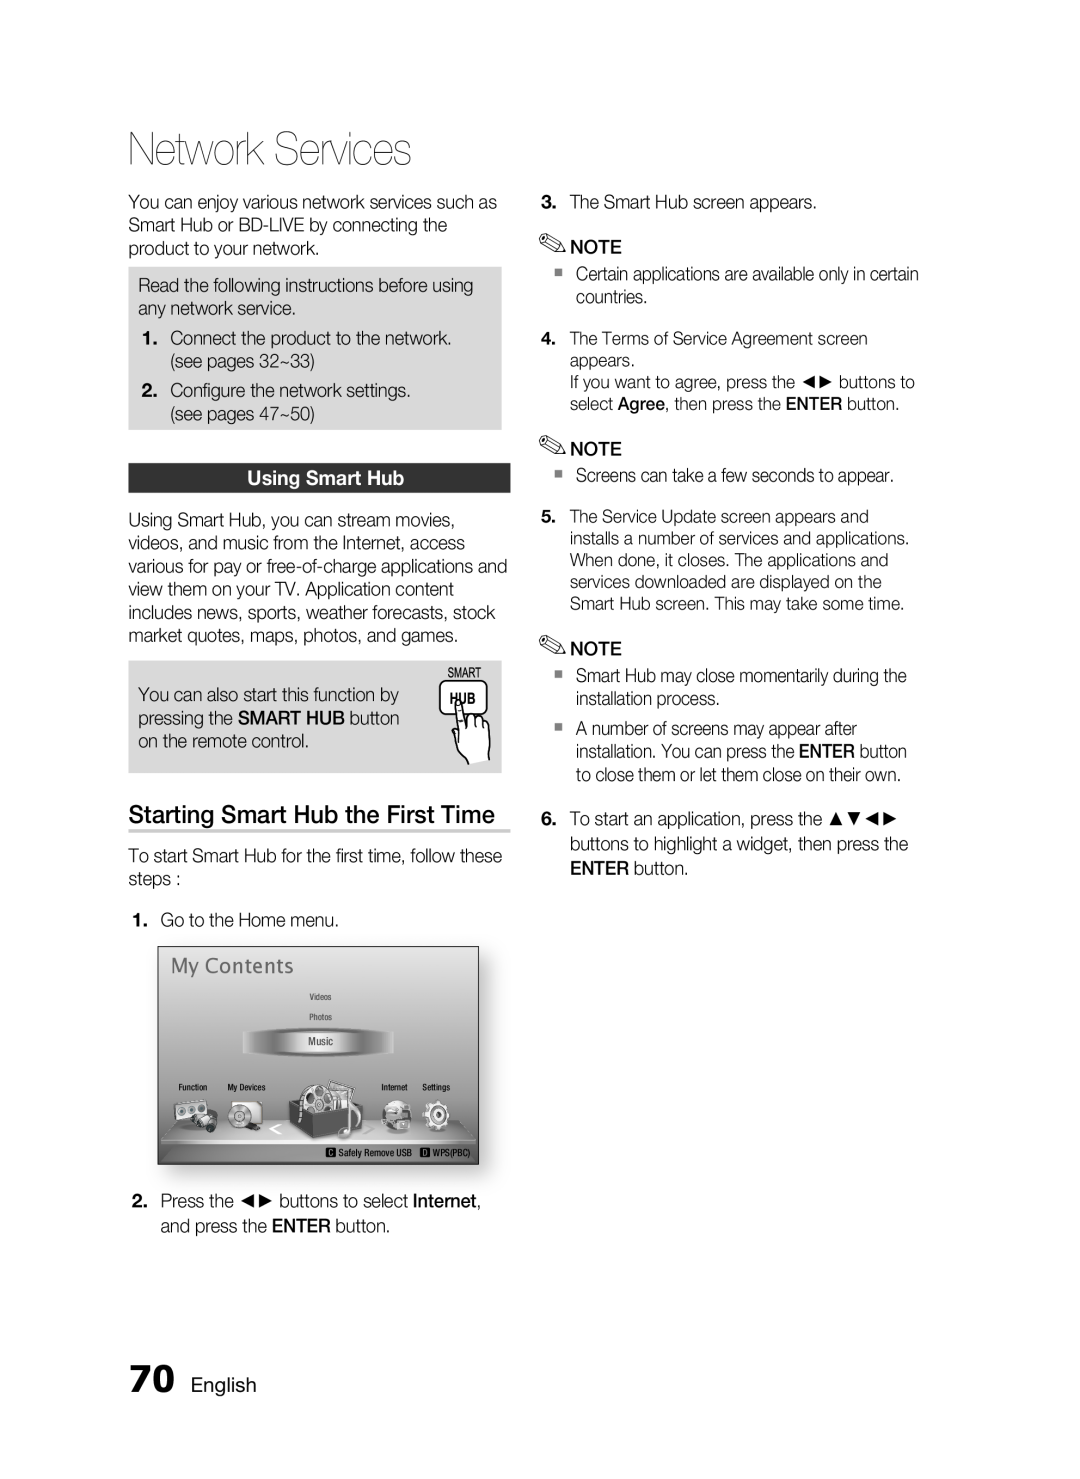 Samsung HW-D7000 user manual Network Services, Starting Smart Hub the First Time, Using Smart Hub, My Contents 